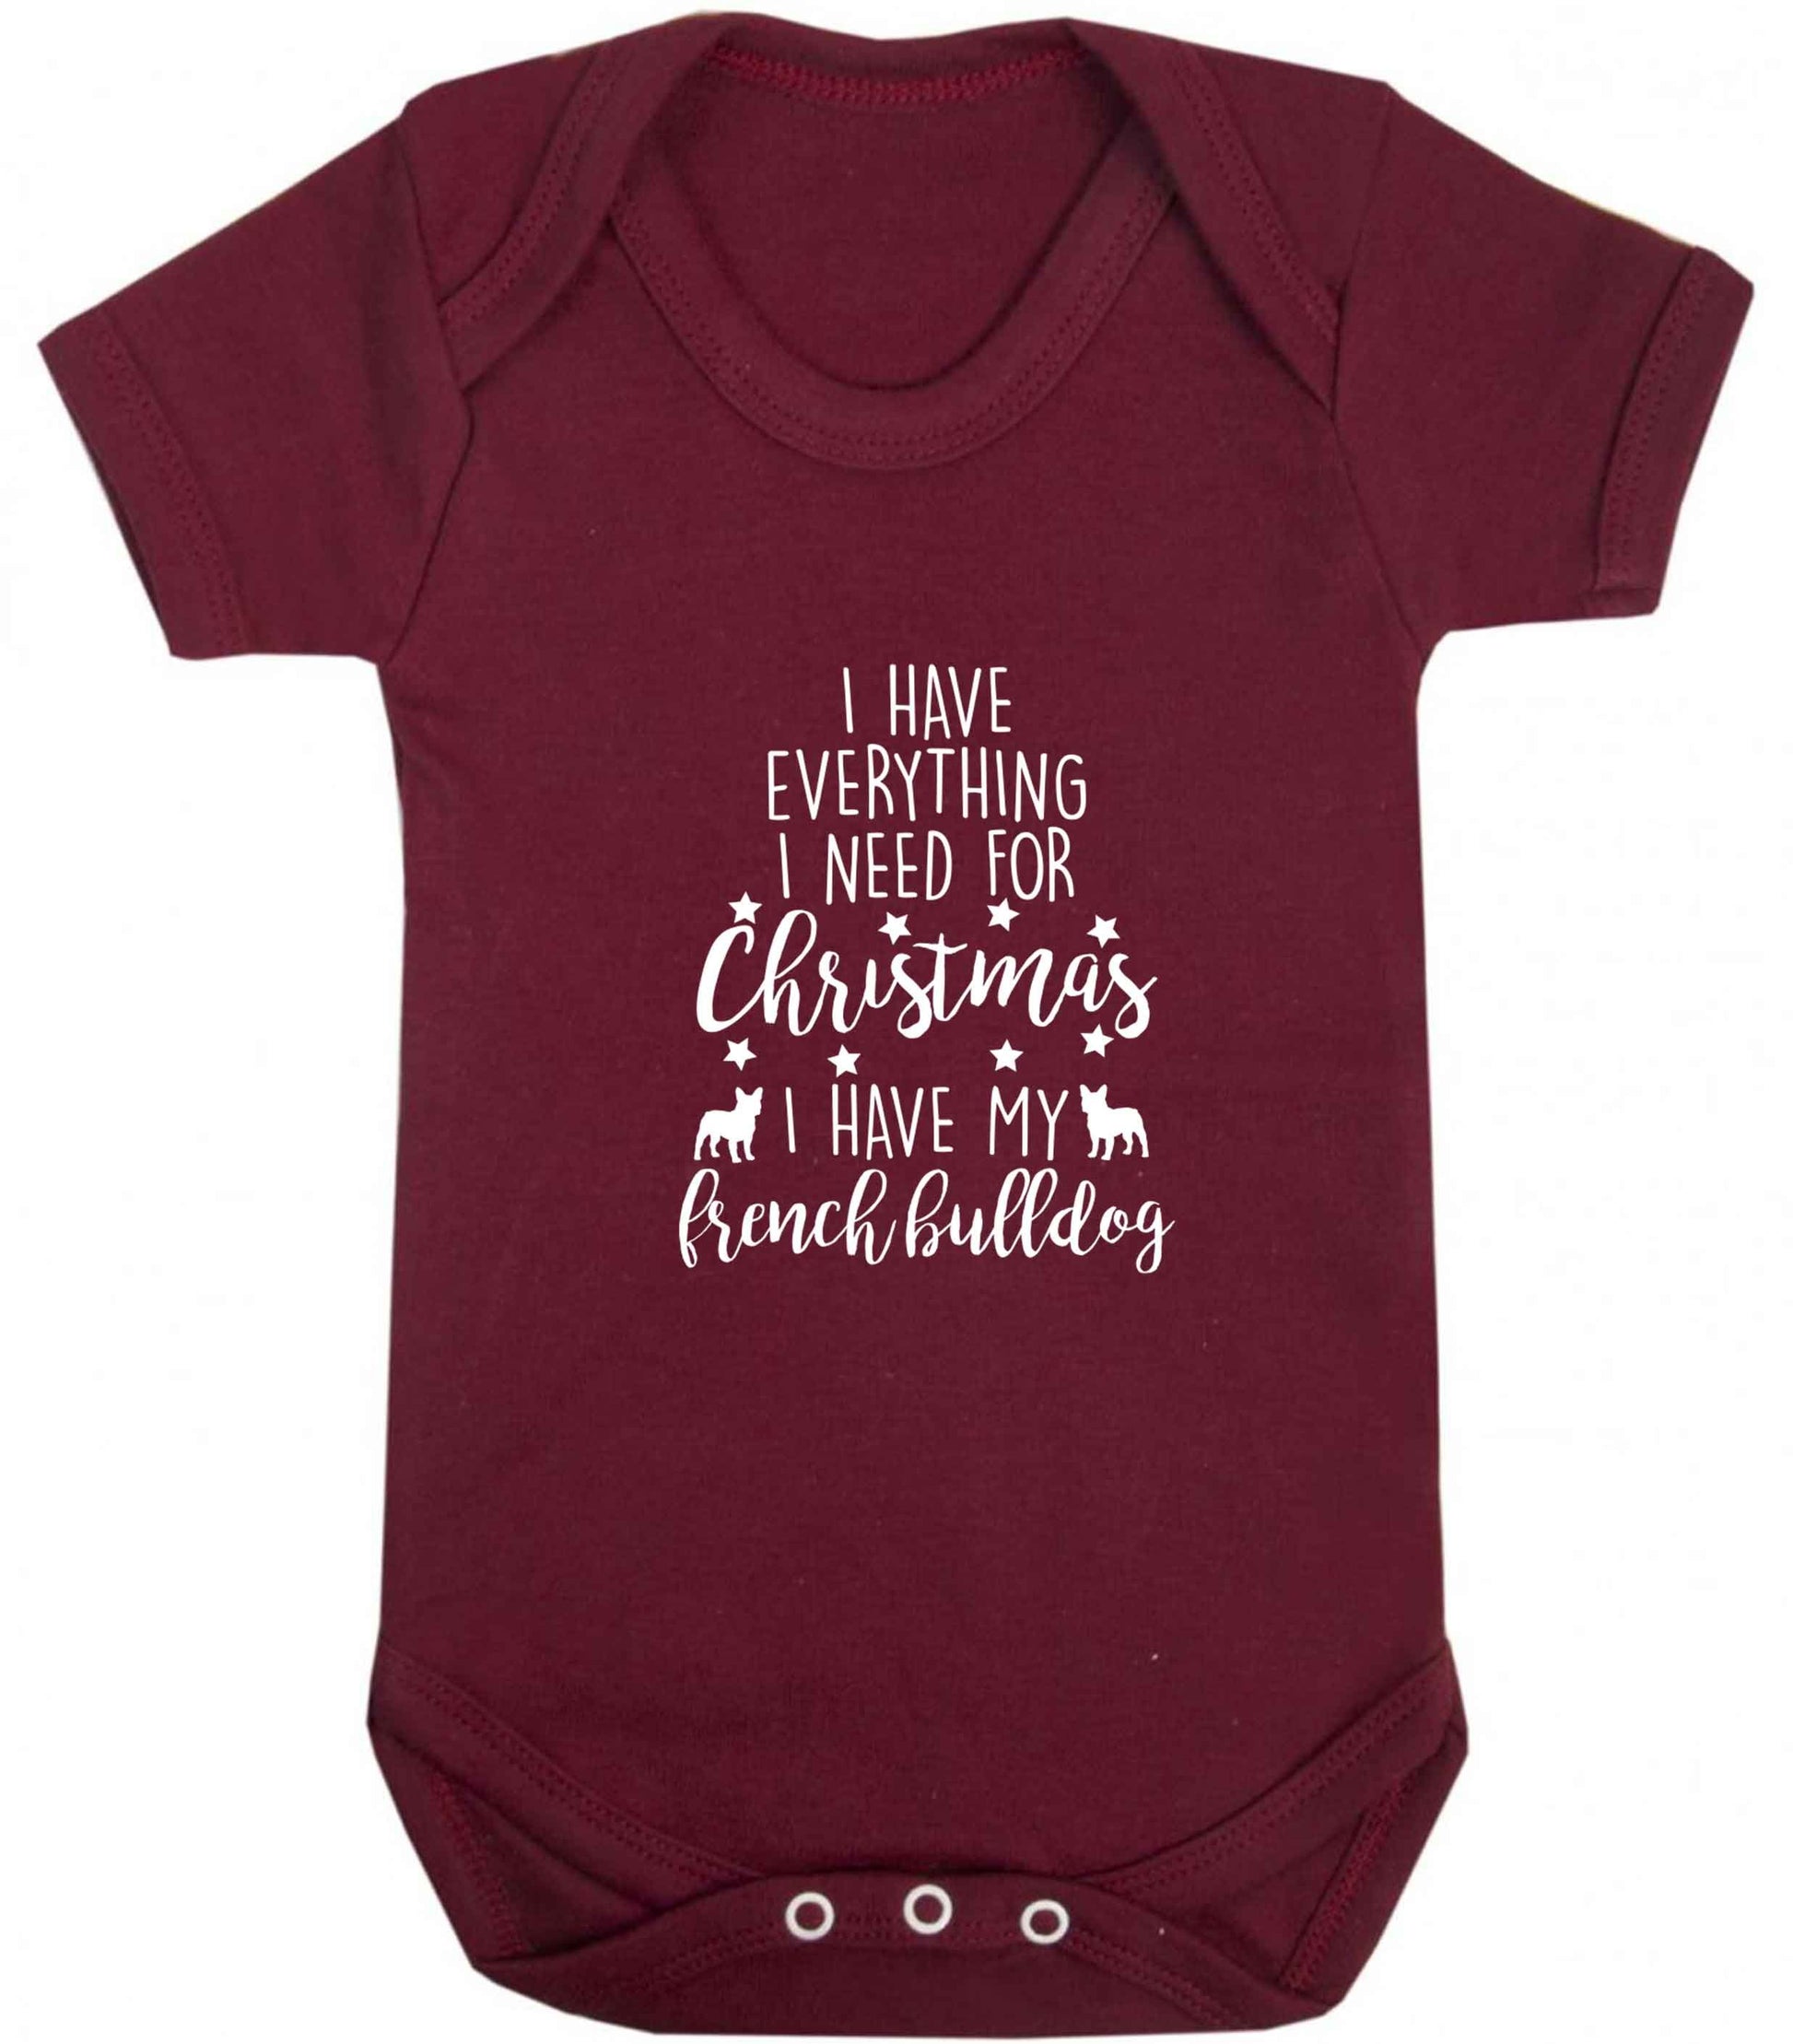 I have everything I need for Christmas I have my french bulldog baby vest maroon 18-24 months